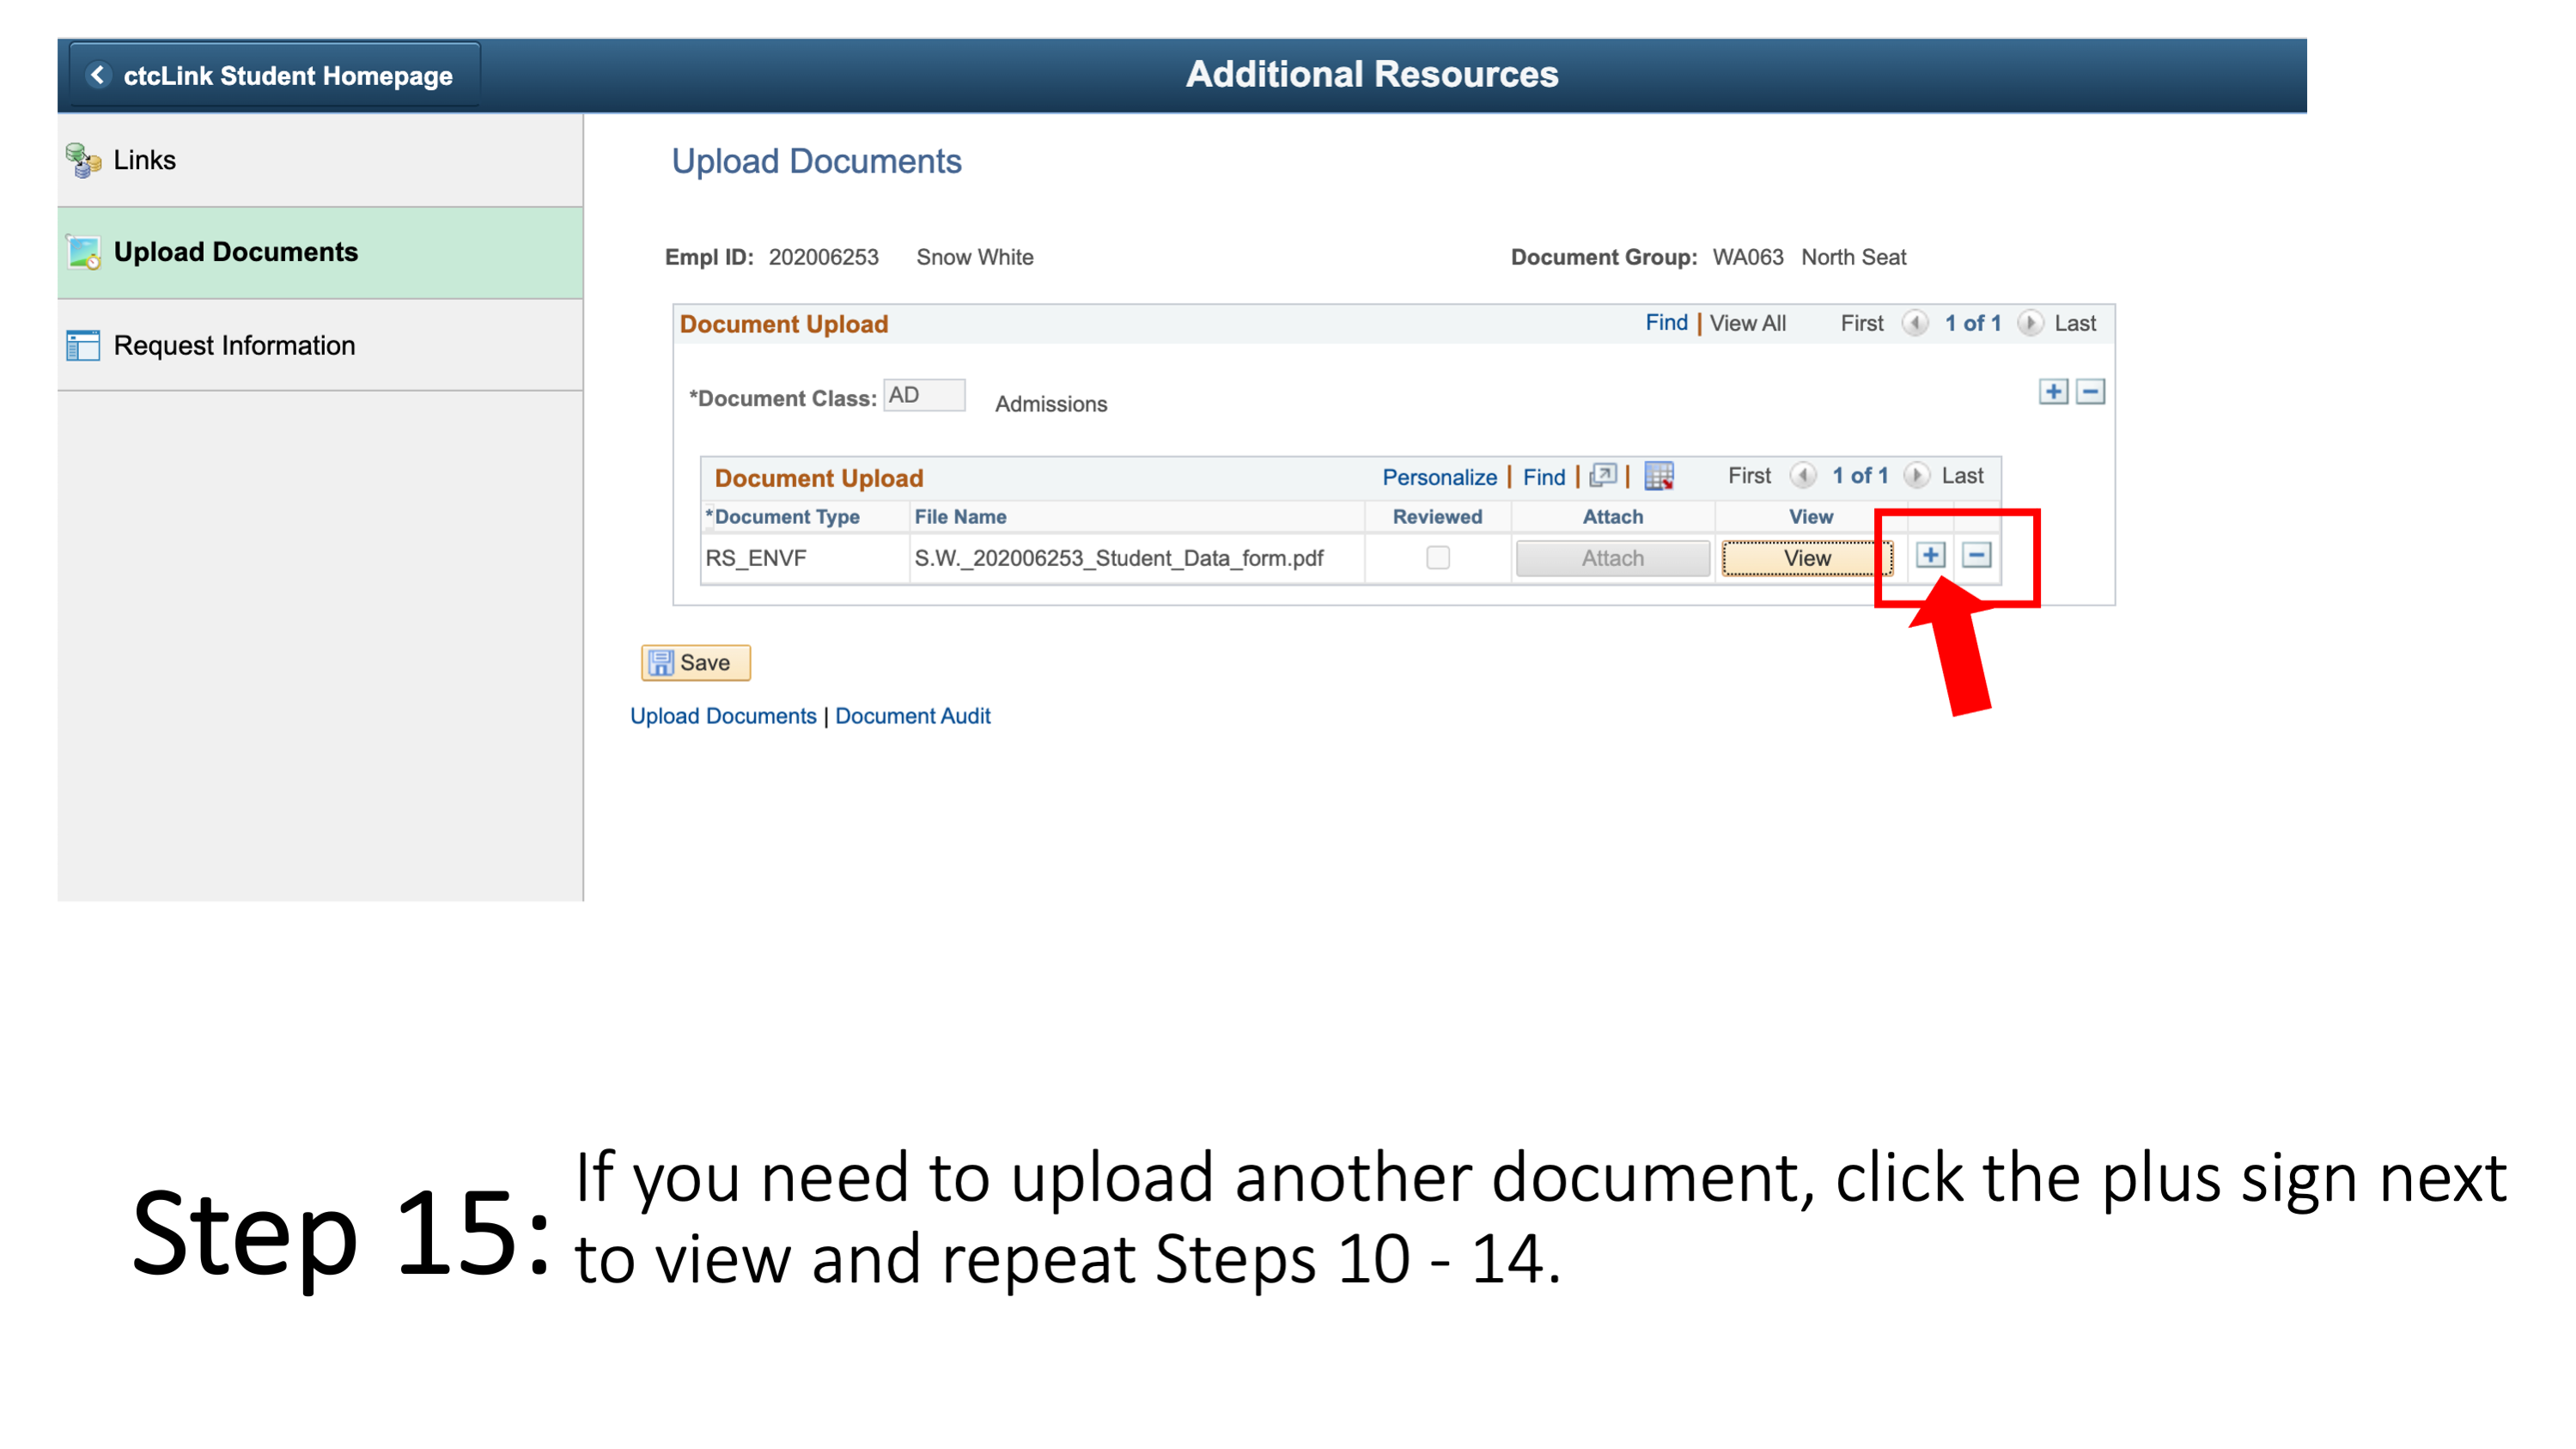 Slide 16 - Step 15: If you need to upload another document, click the plus sign next to view and repeat Steps 10 - 14. 